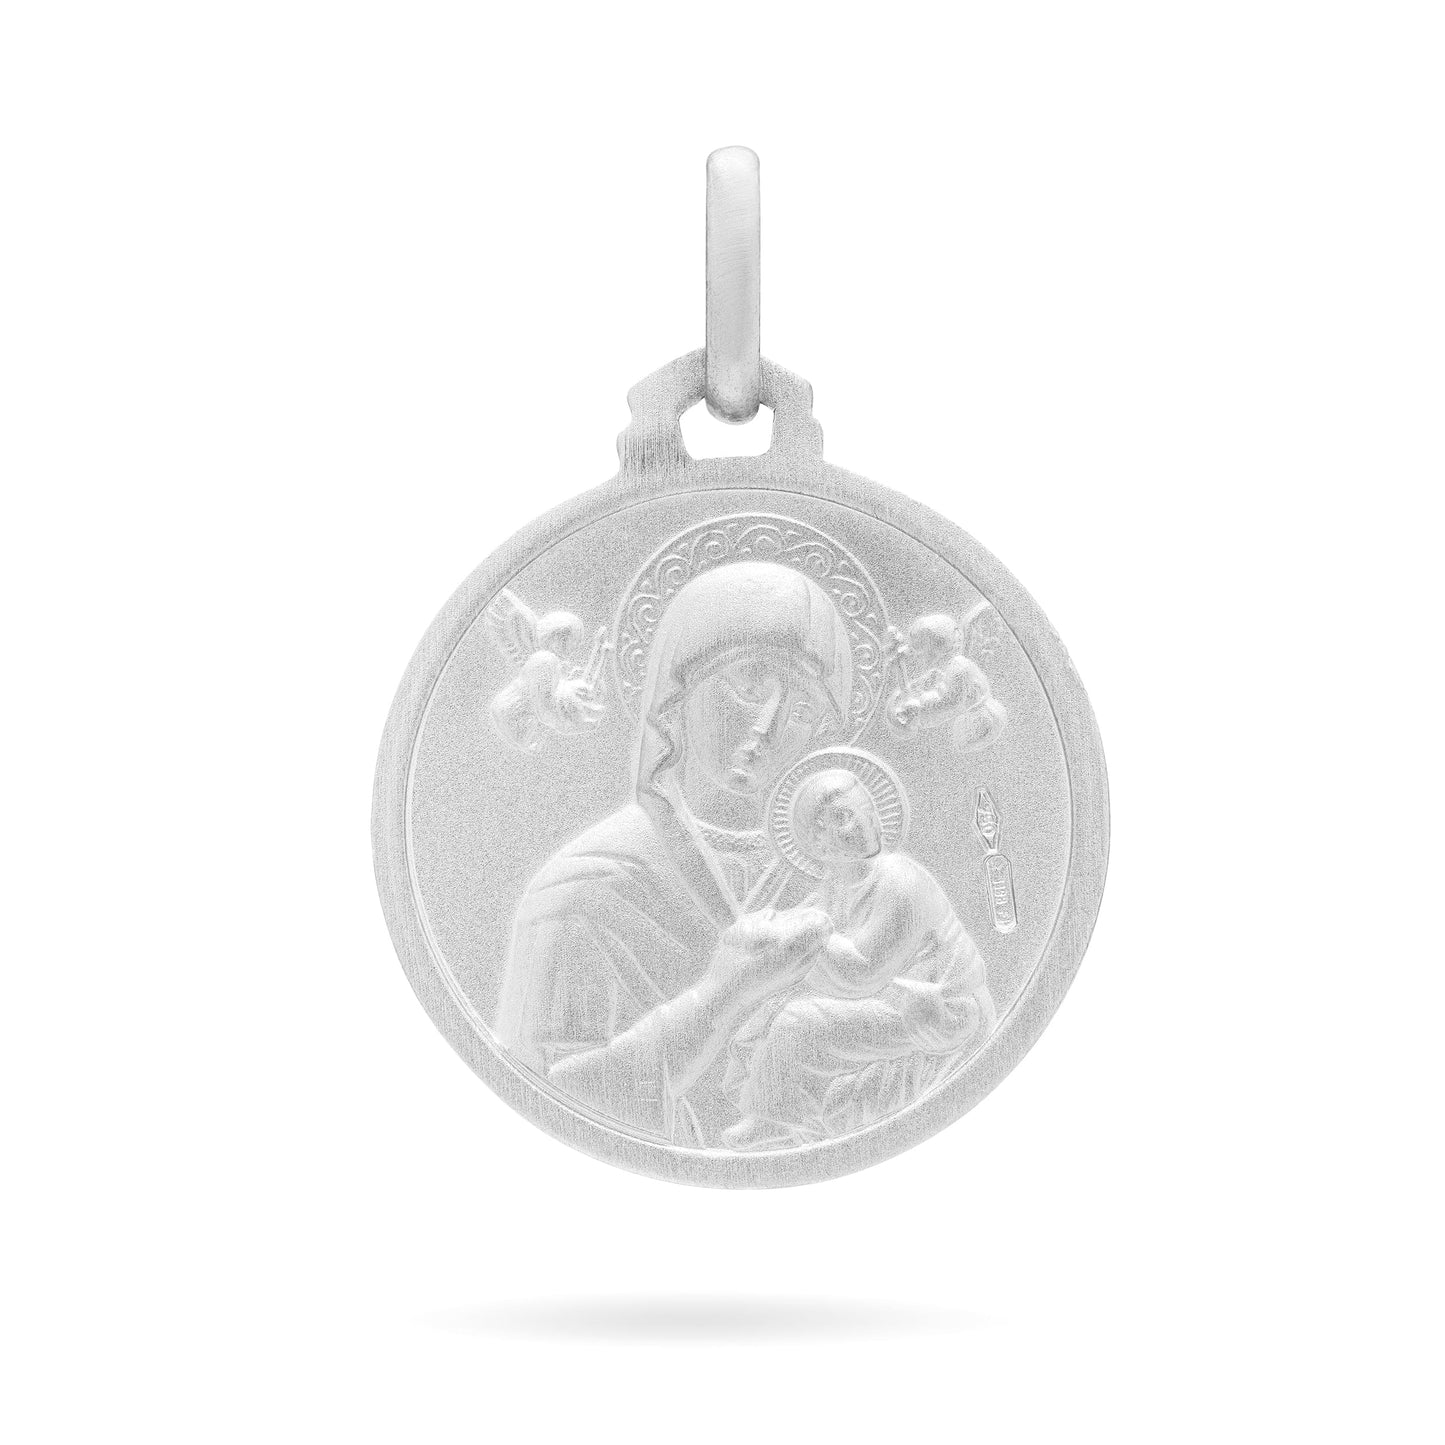 MONDO CATTOLICO Medal 21 mm (0.82 in) Silver medal of Our Lady of Perpetual Help